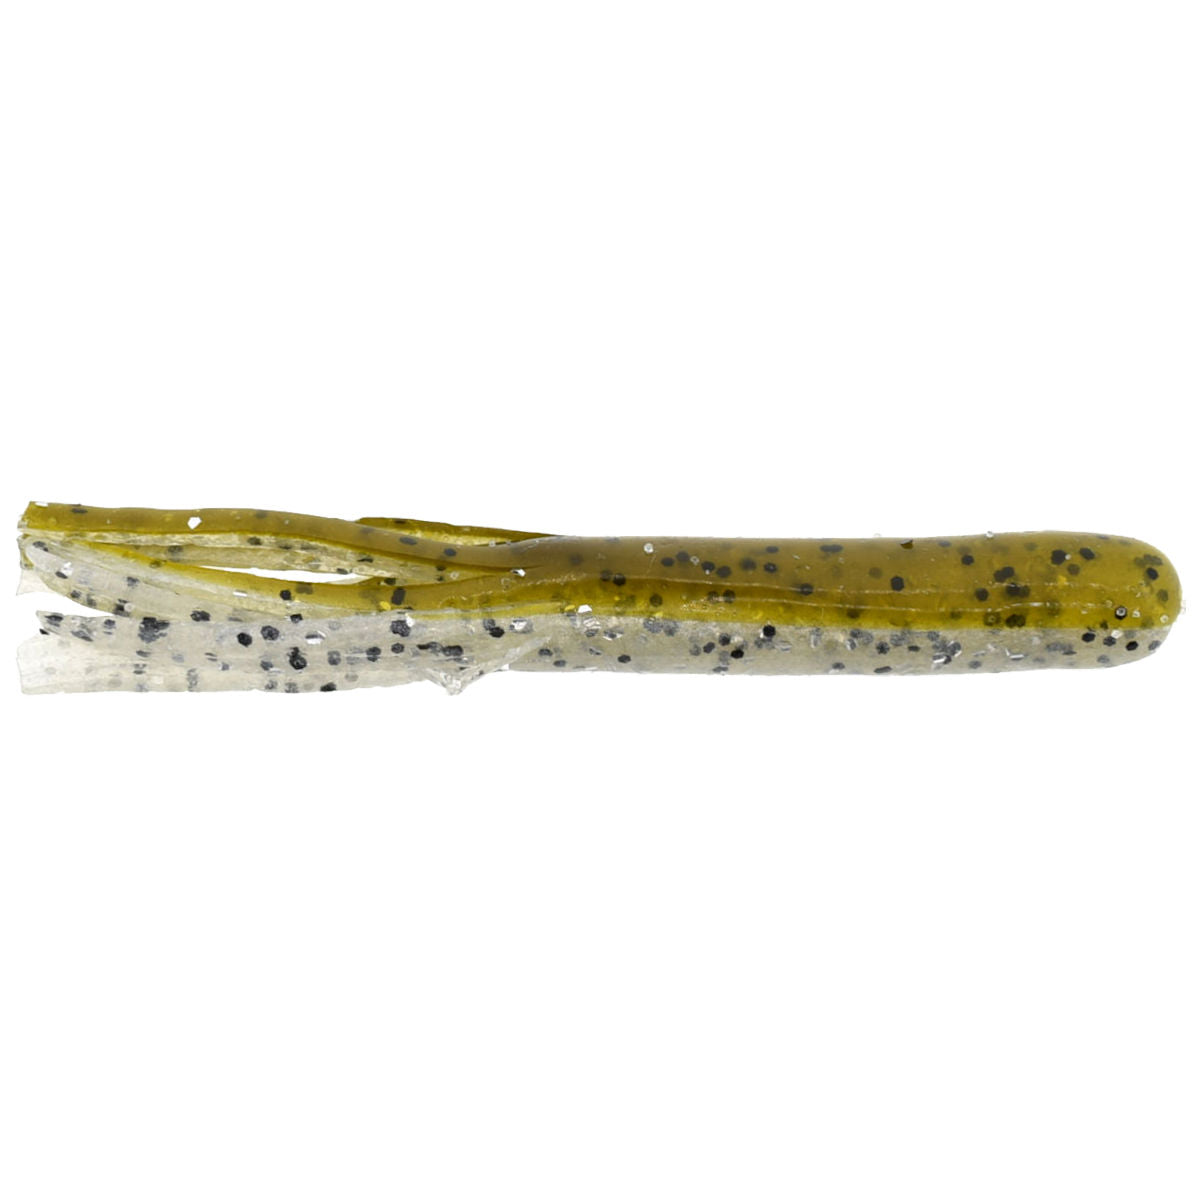 Goby Series Laminated Salt Tube_Green Goby